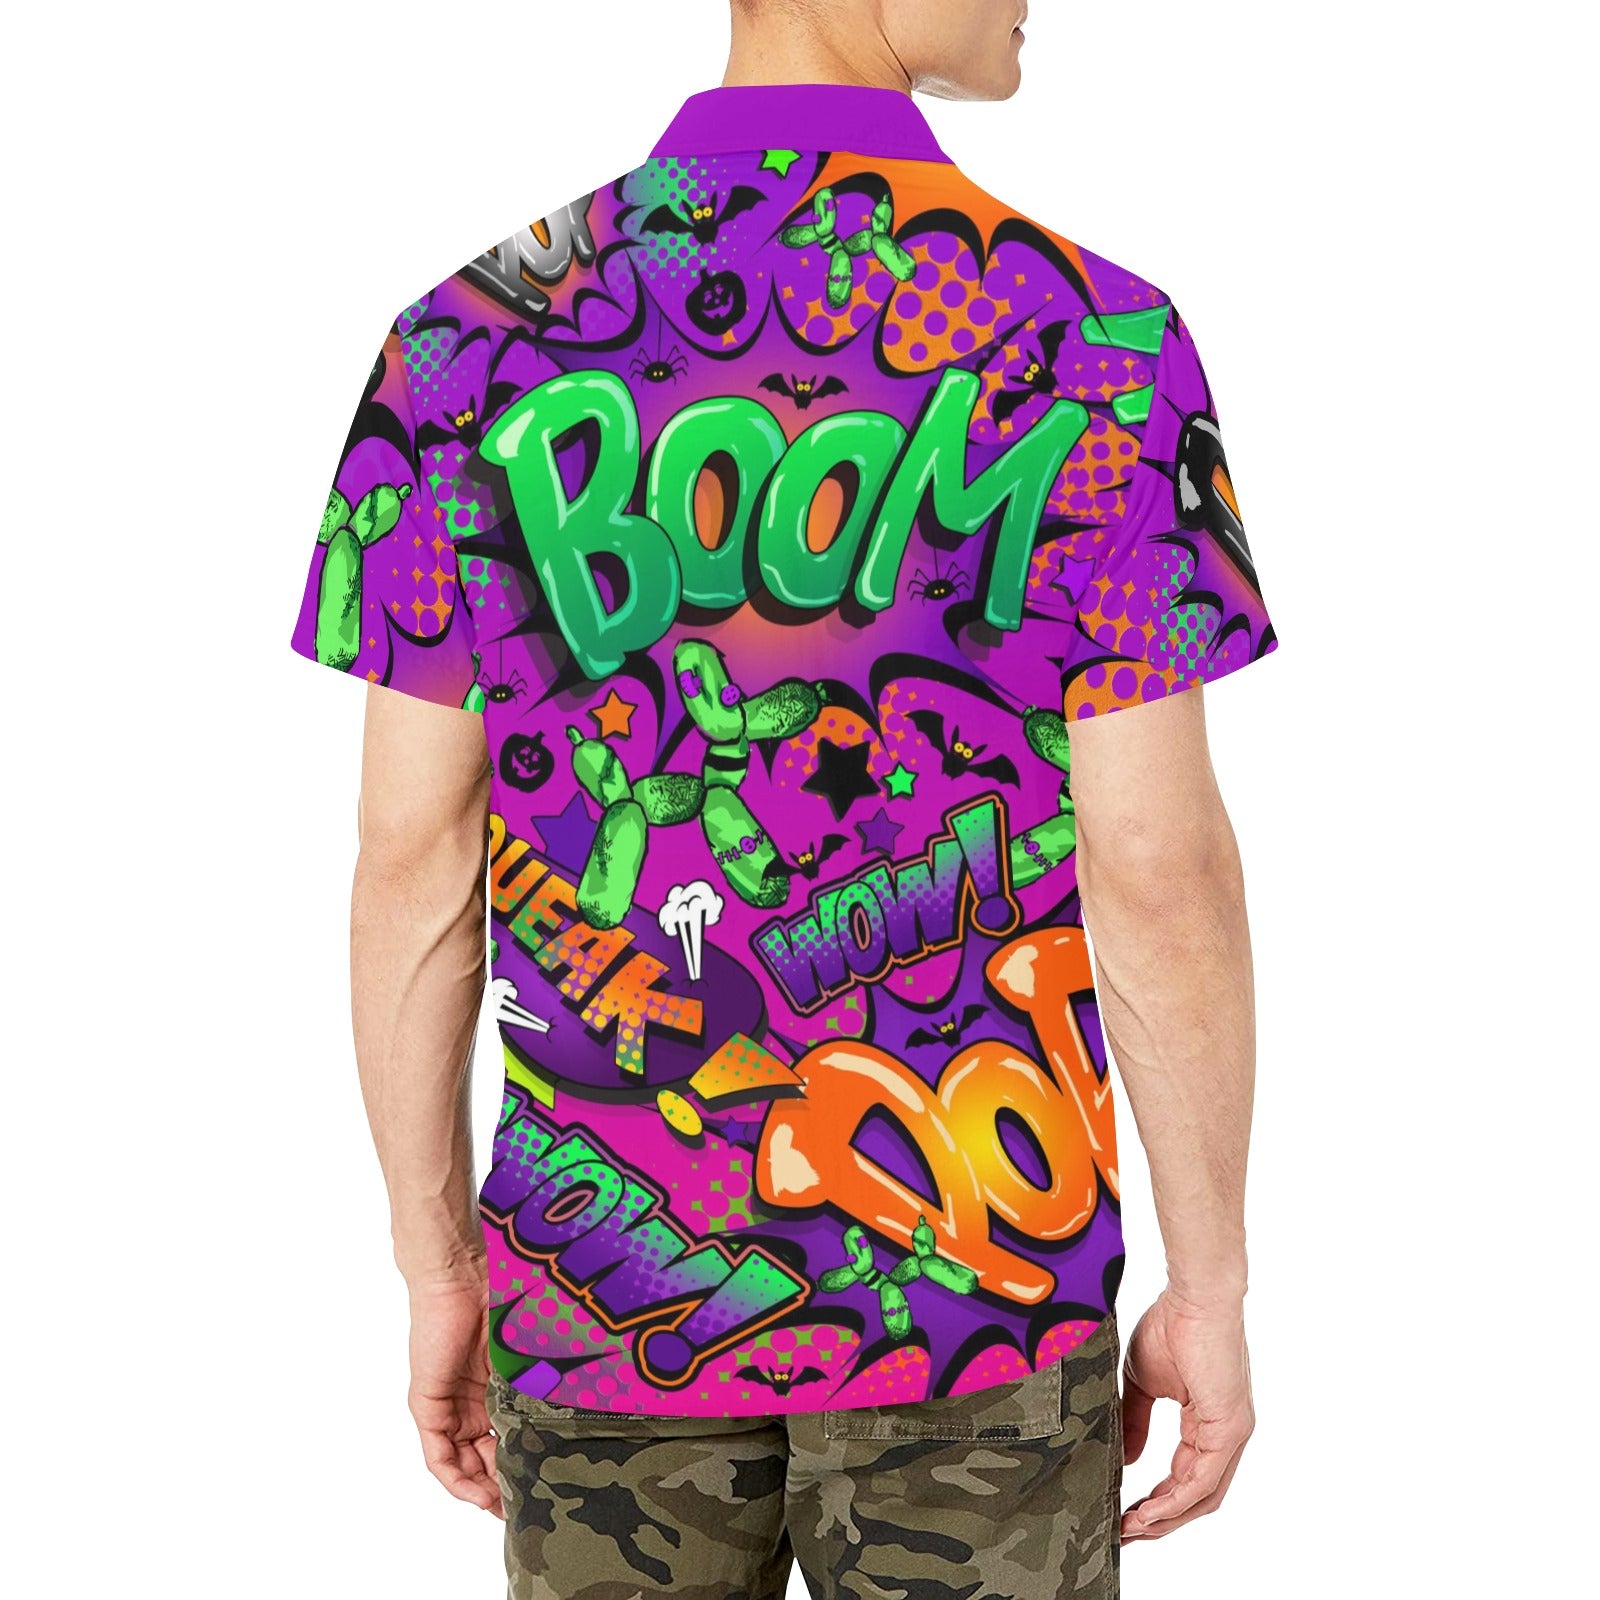 Balloon Twister shirt with pocket for Halloween